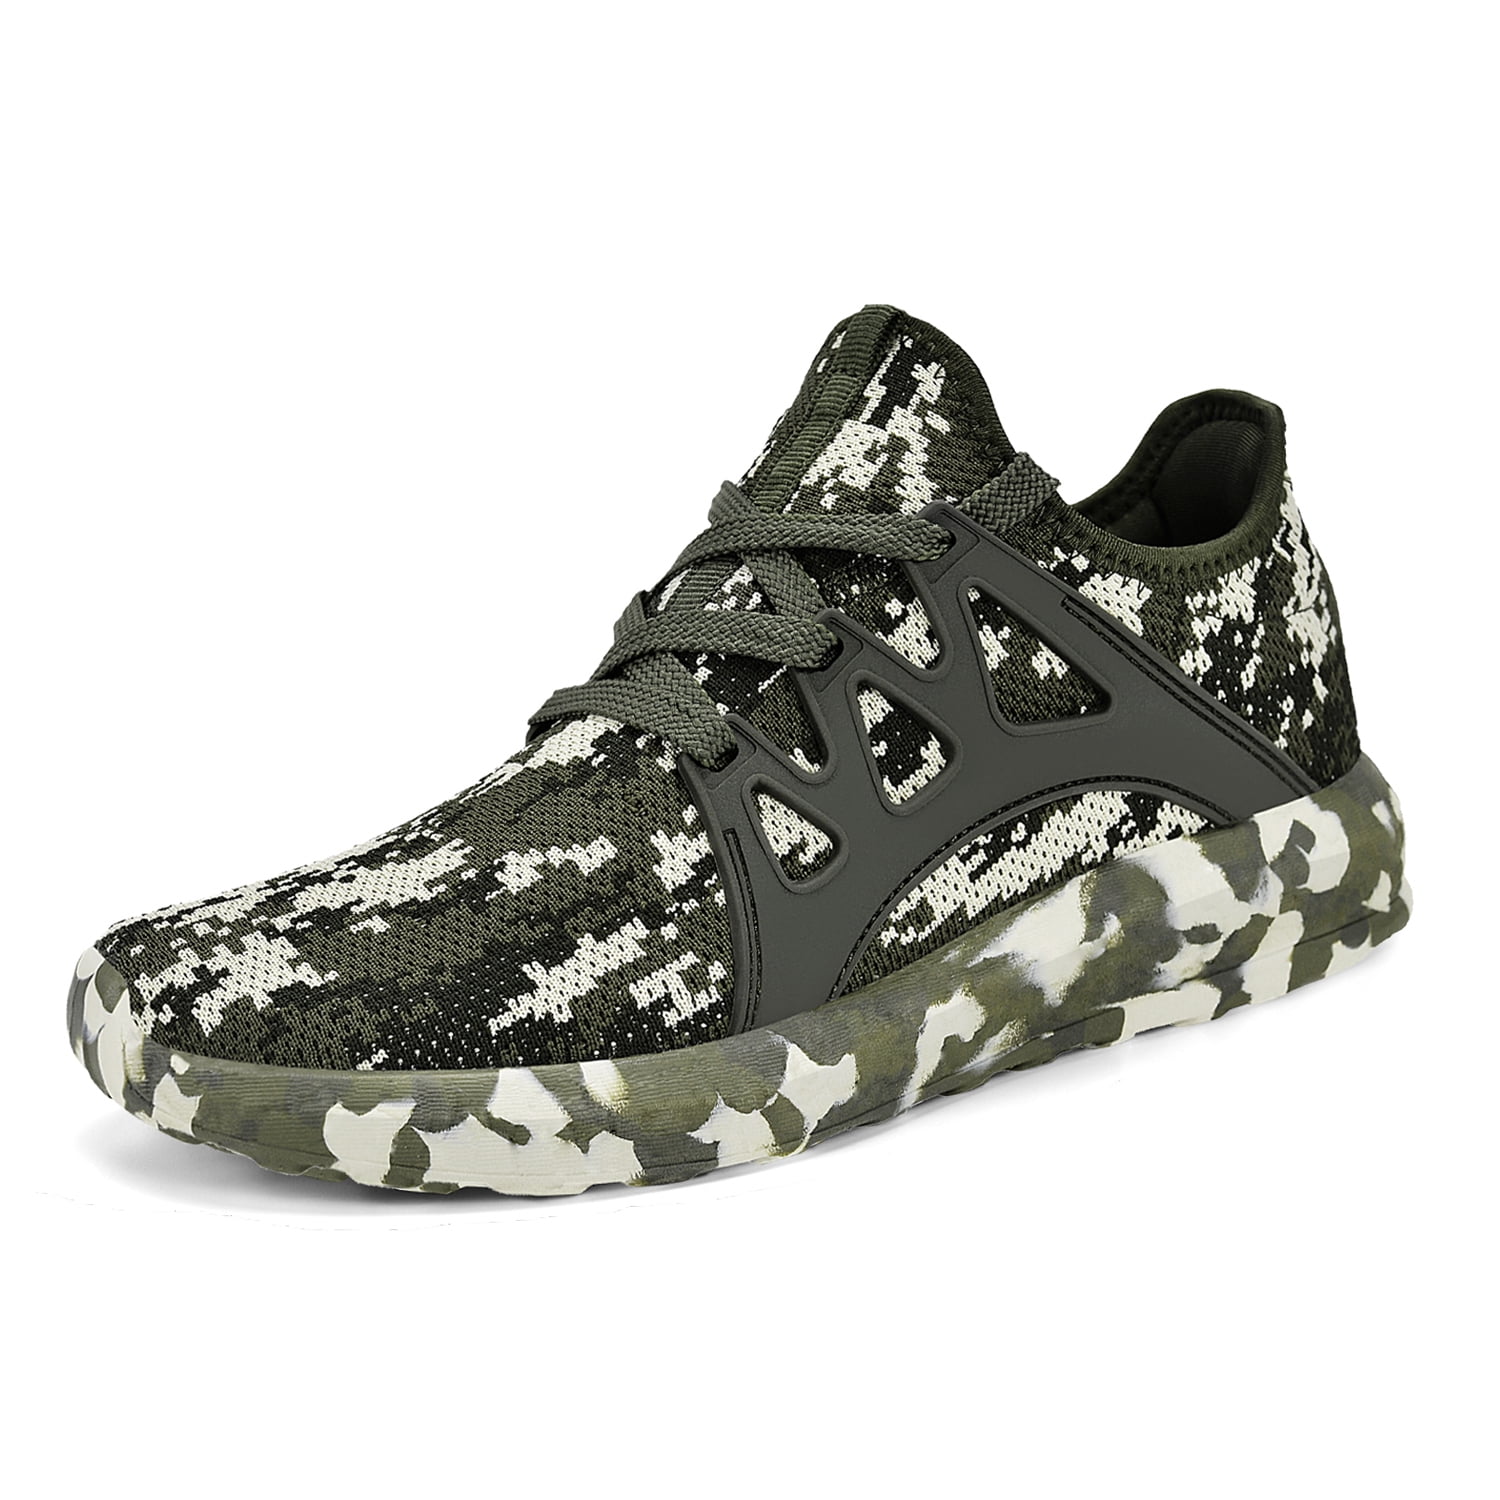 Men Big Size Camouflage Running Shoes Breathable Soft Light Walking Casual Shoes